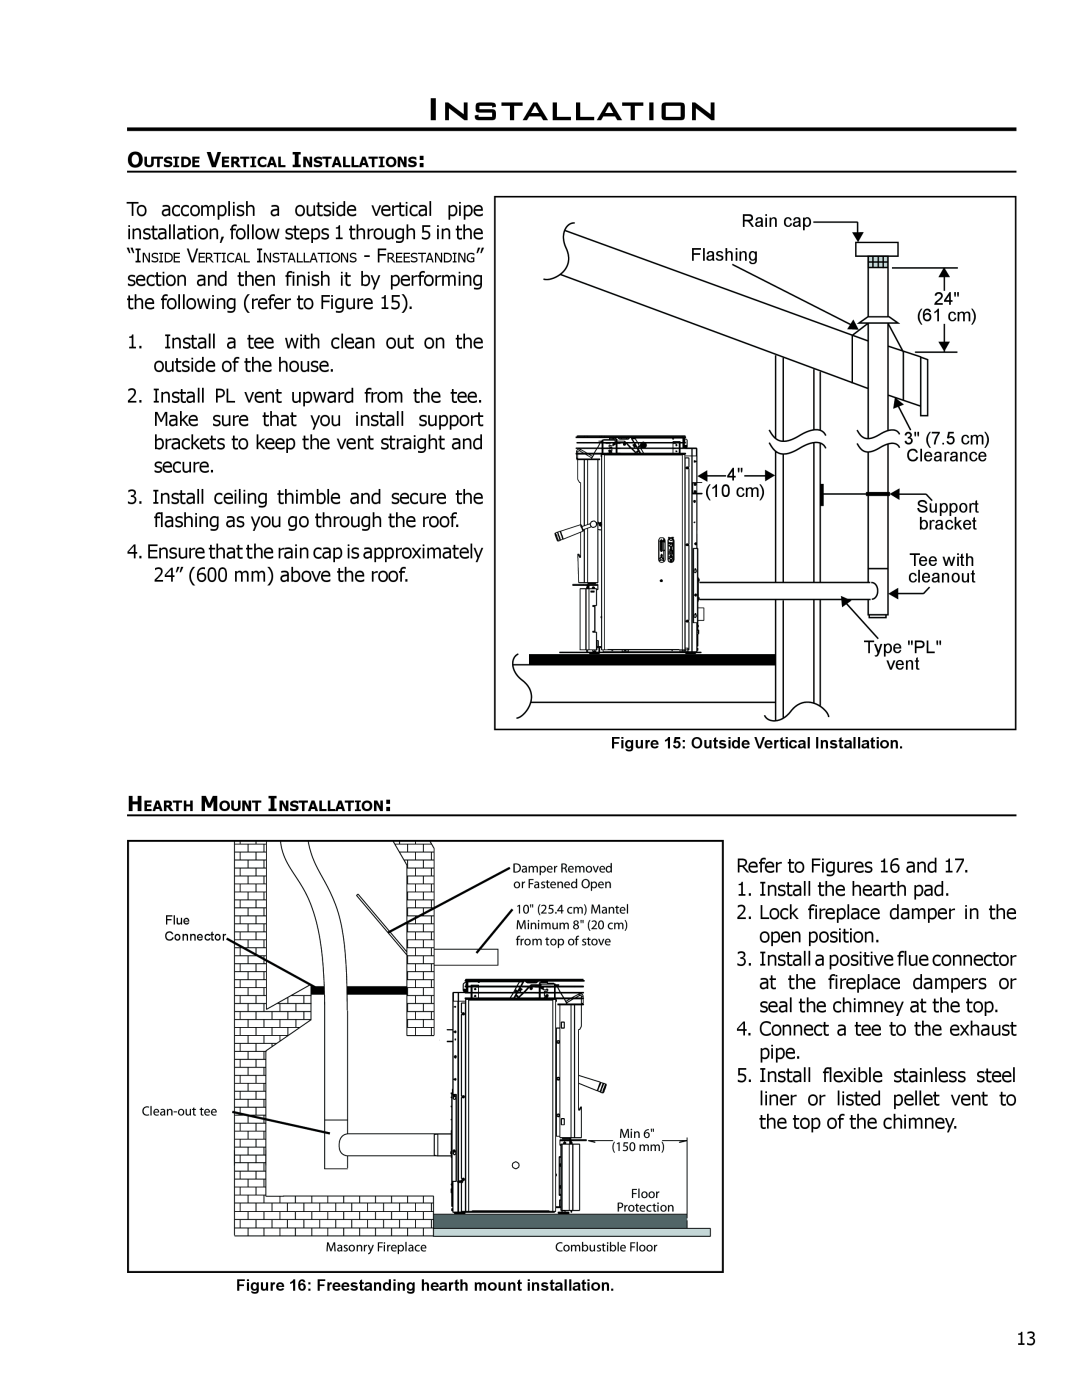 Mega Catch Mini technical manual Installation, Refer to Figures 16 and 